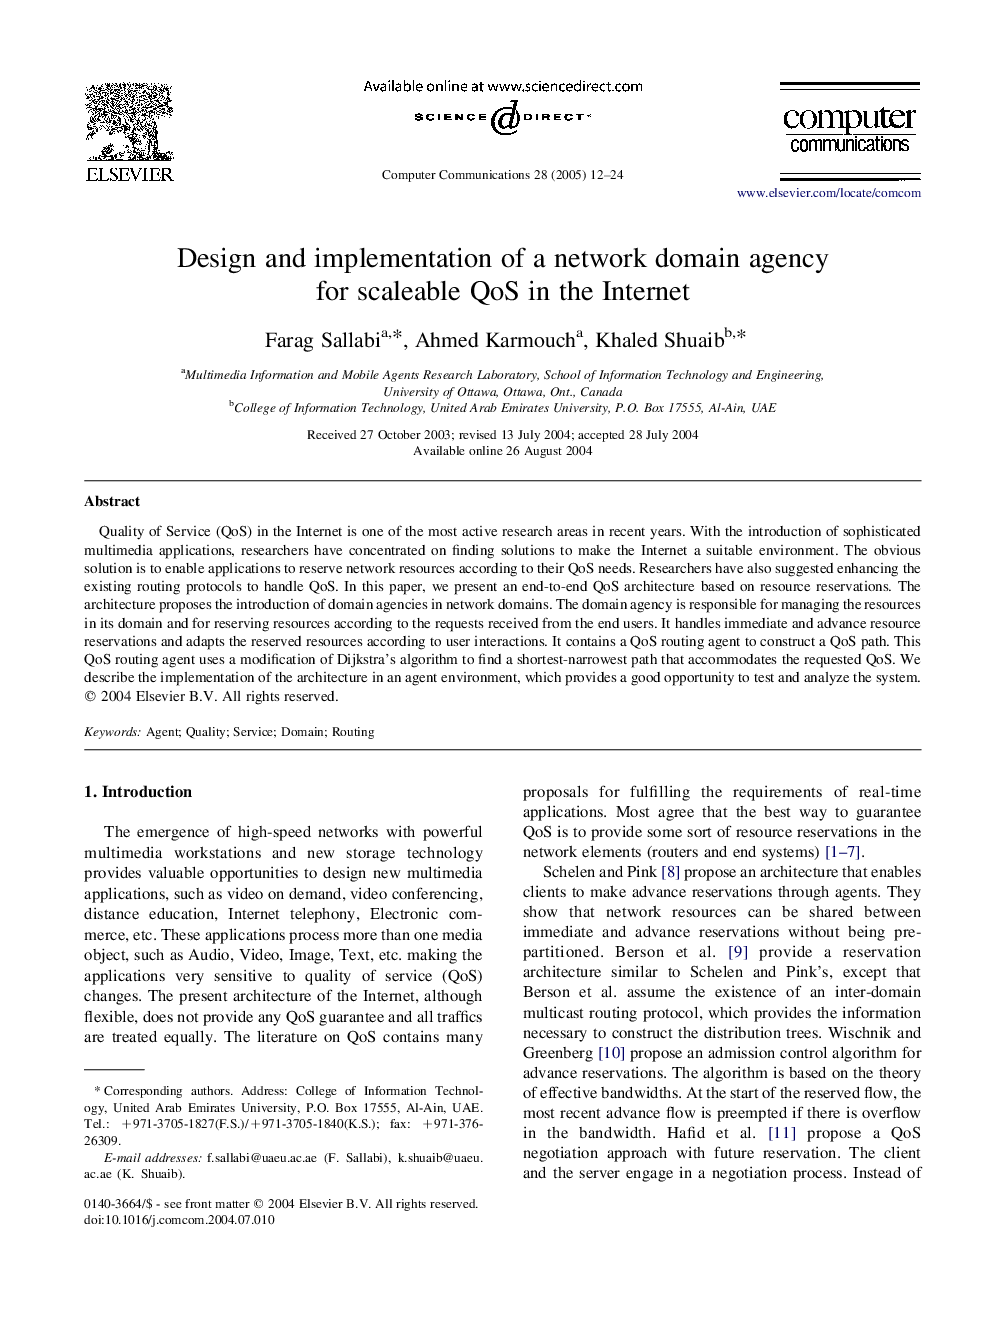 Design and implementation of a network domain agency for scaleable QoS in the Internet